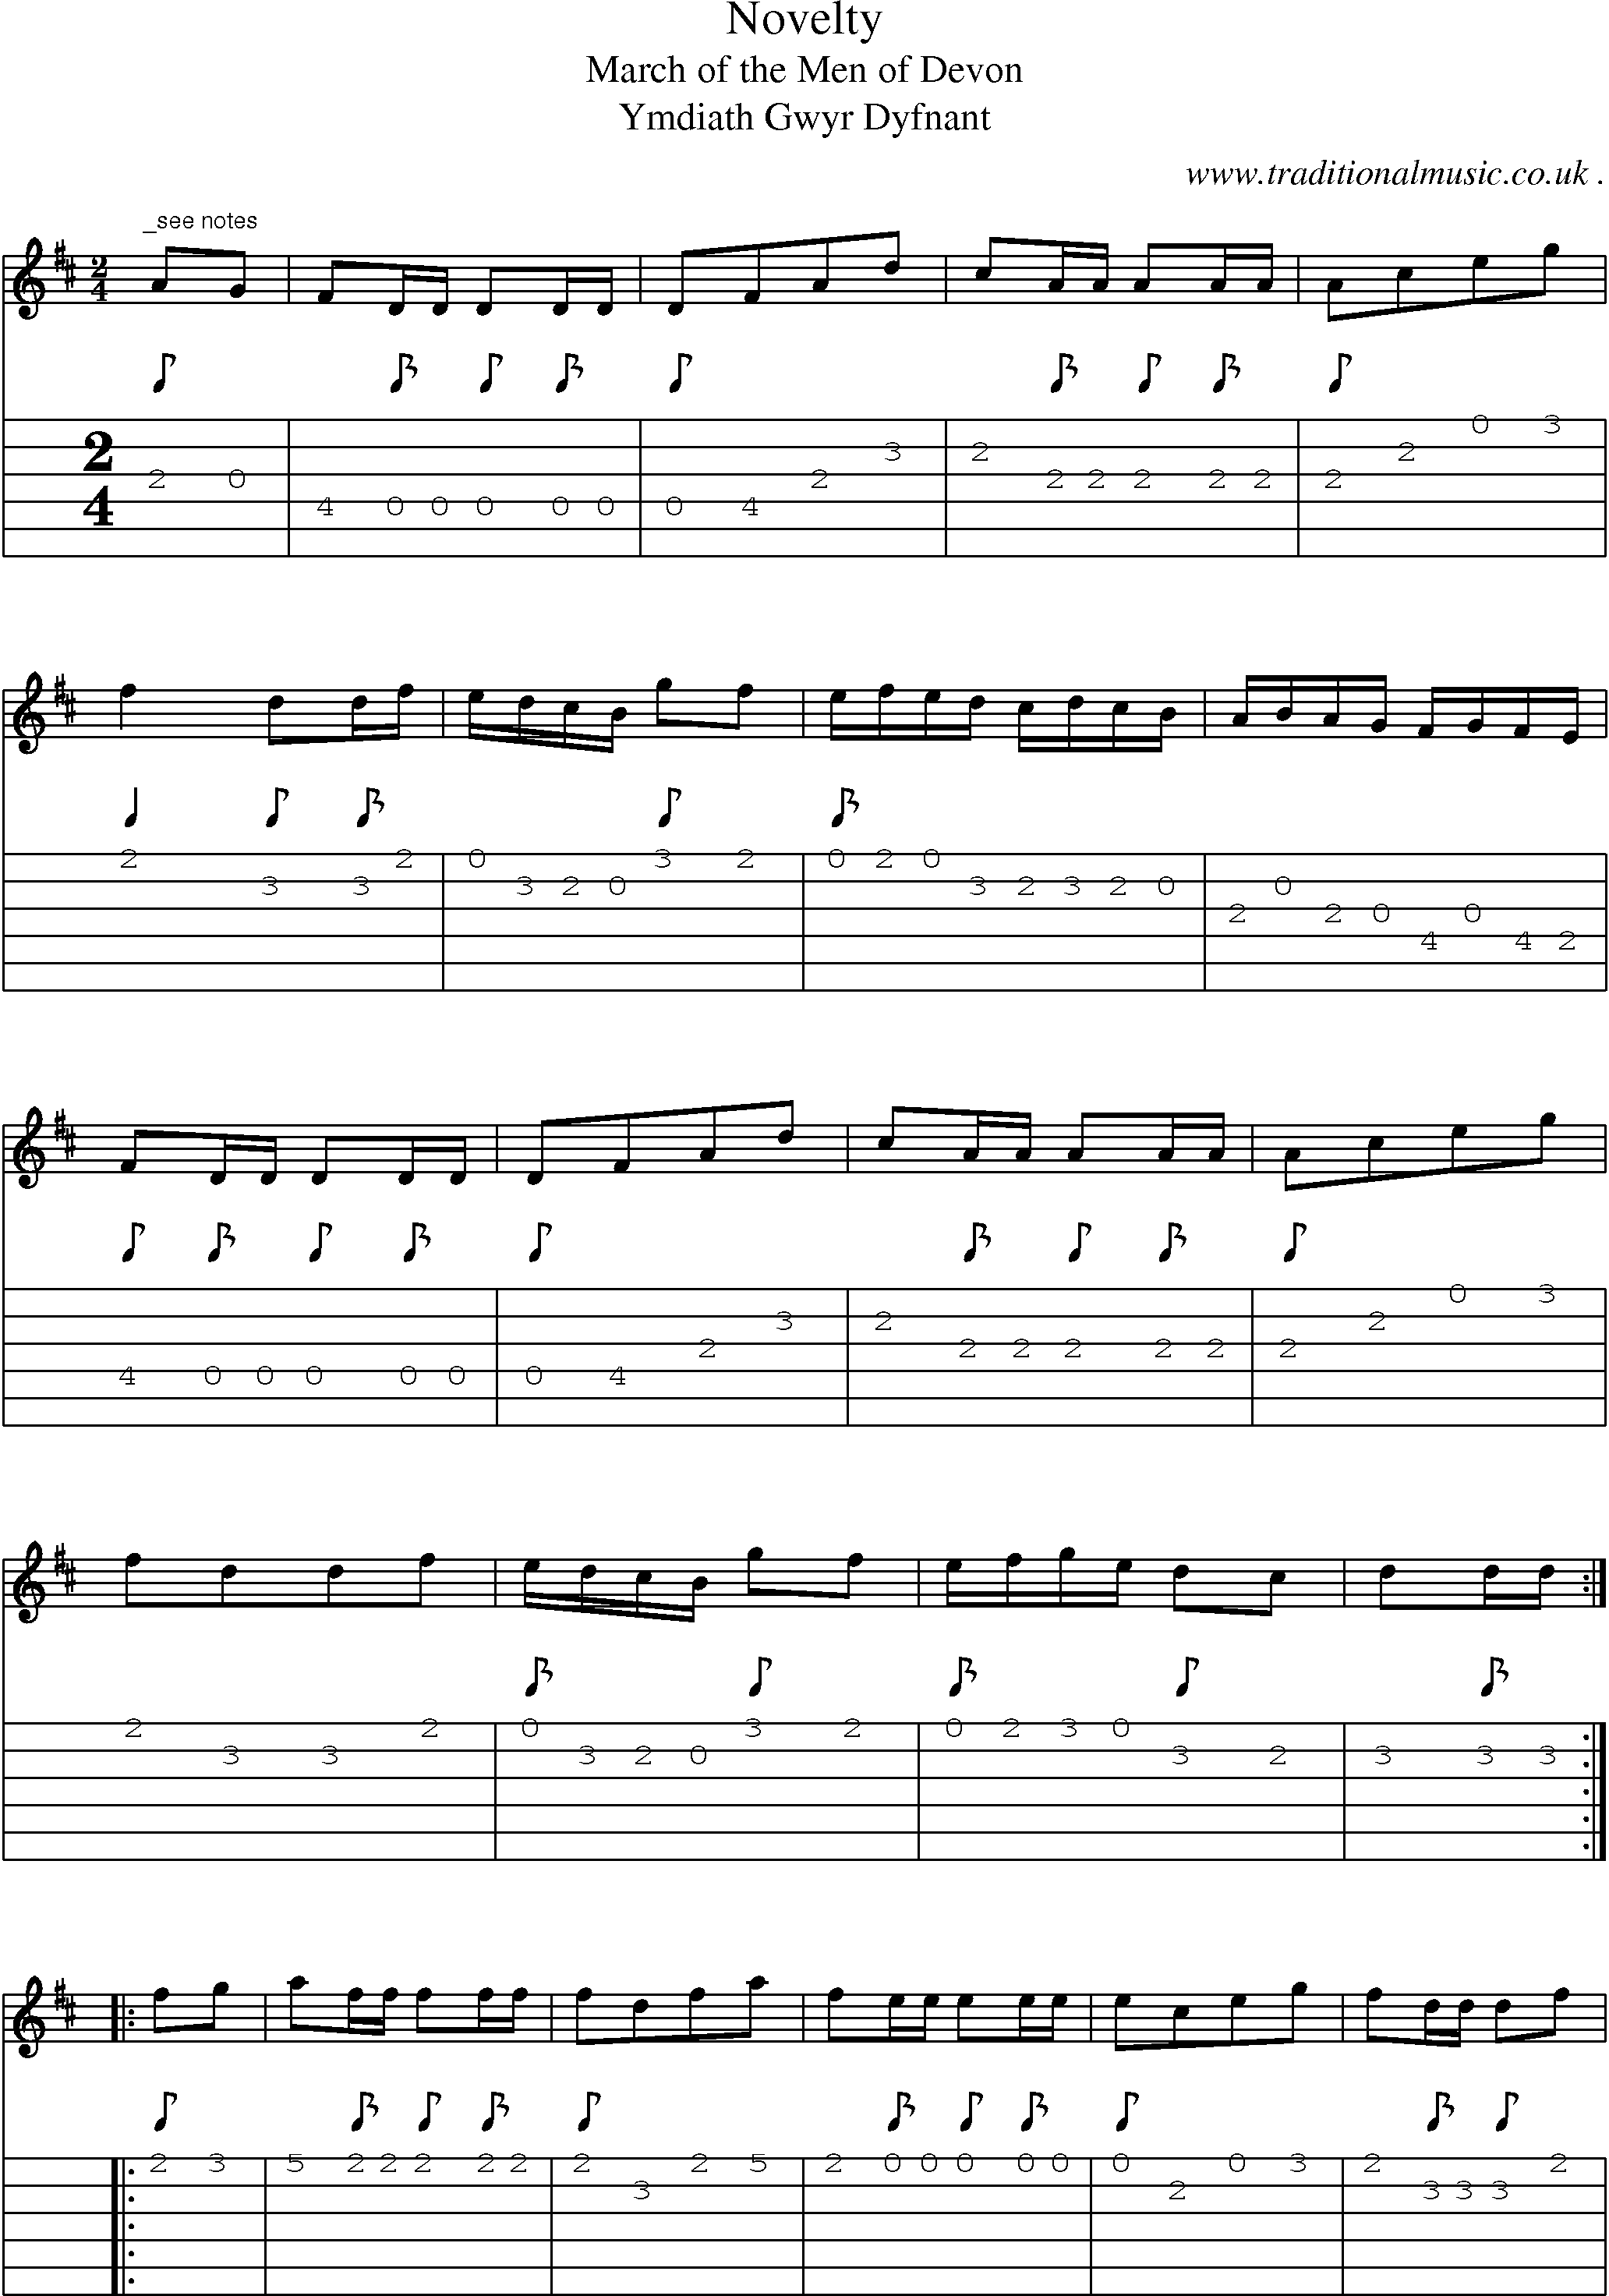 Sheet-Music and Guitar Tabs for Novelty